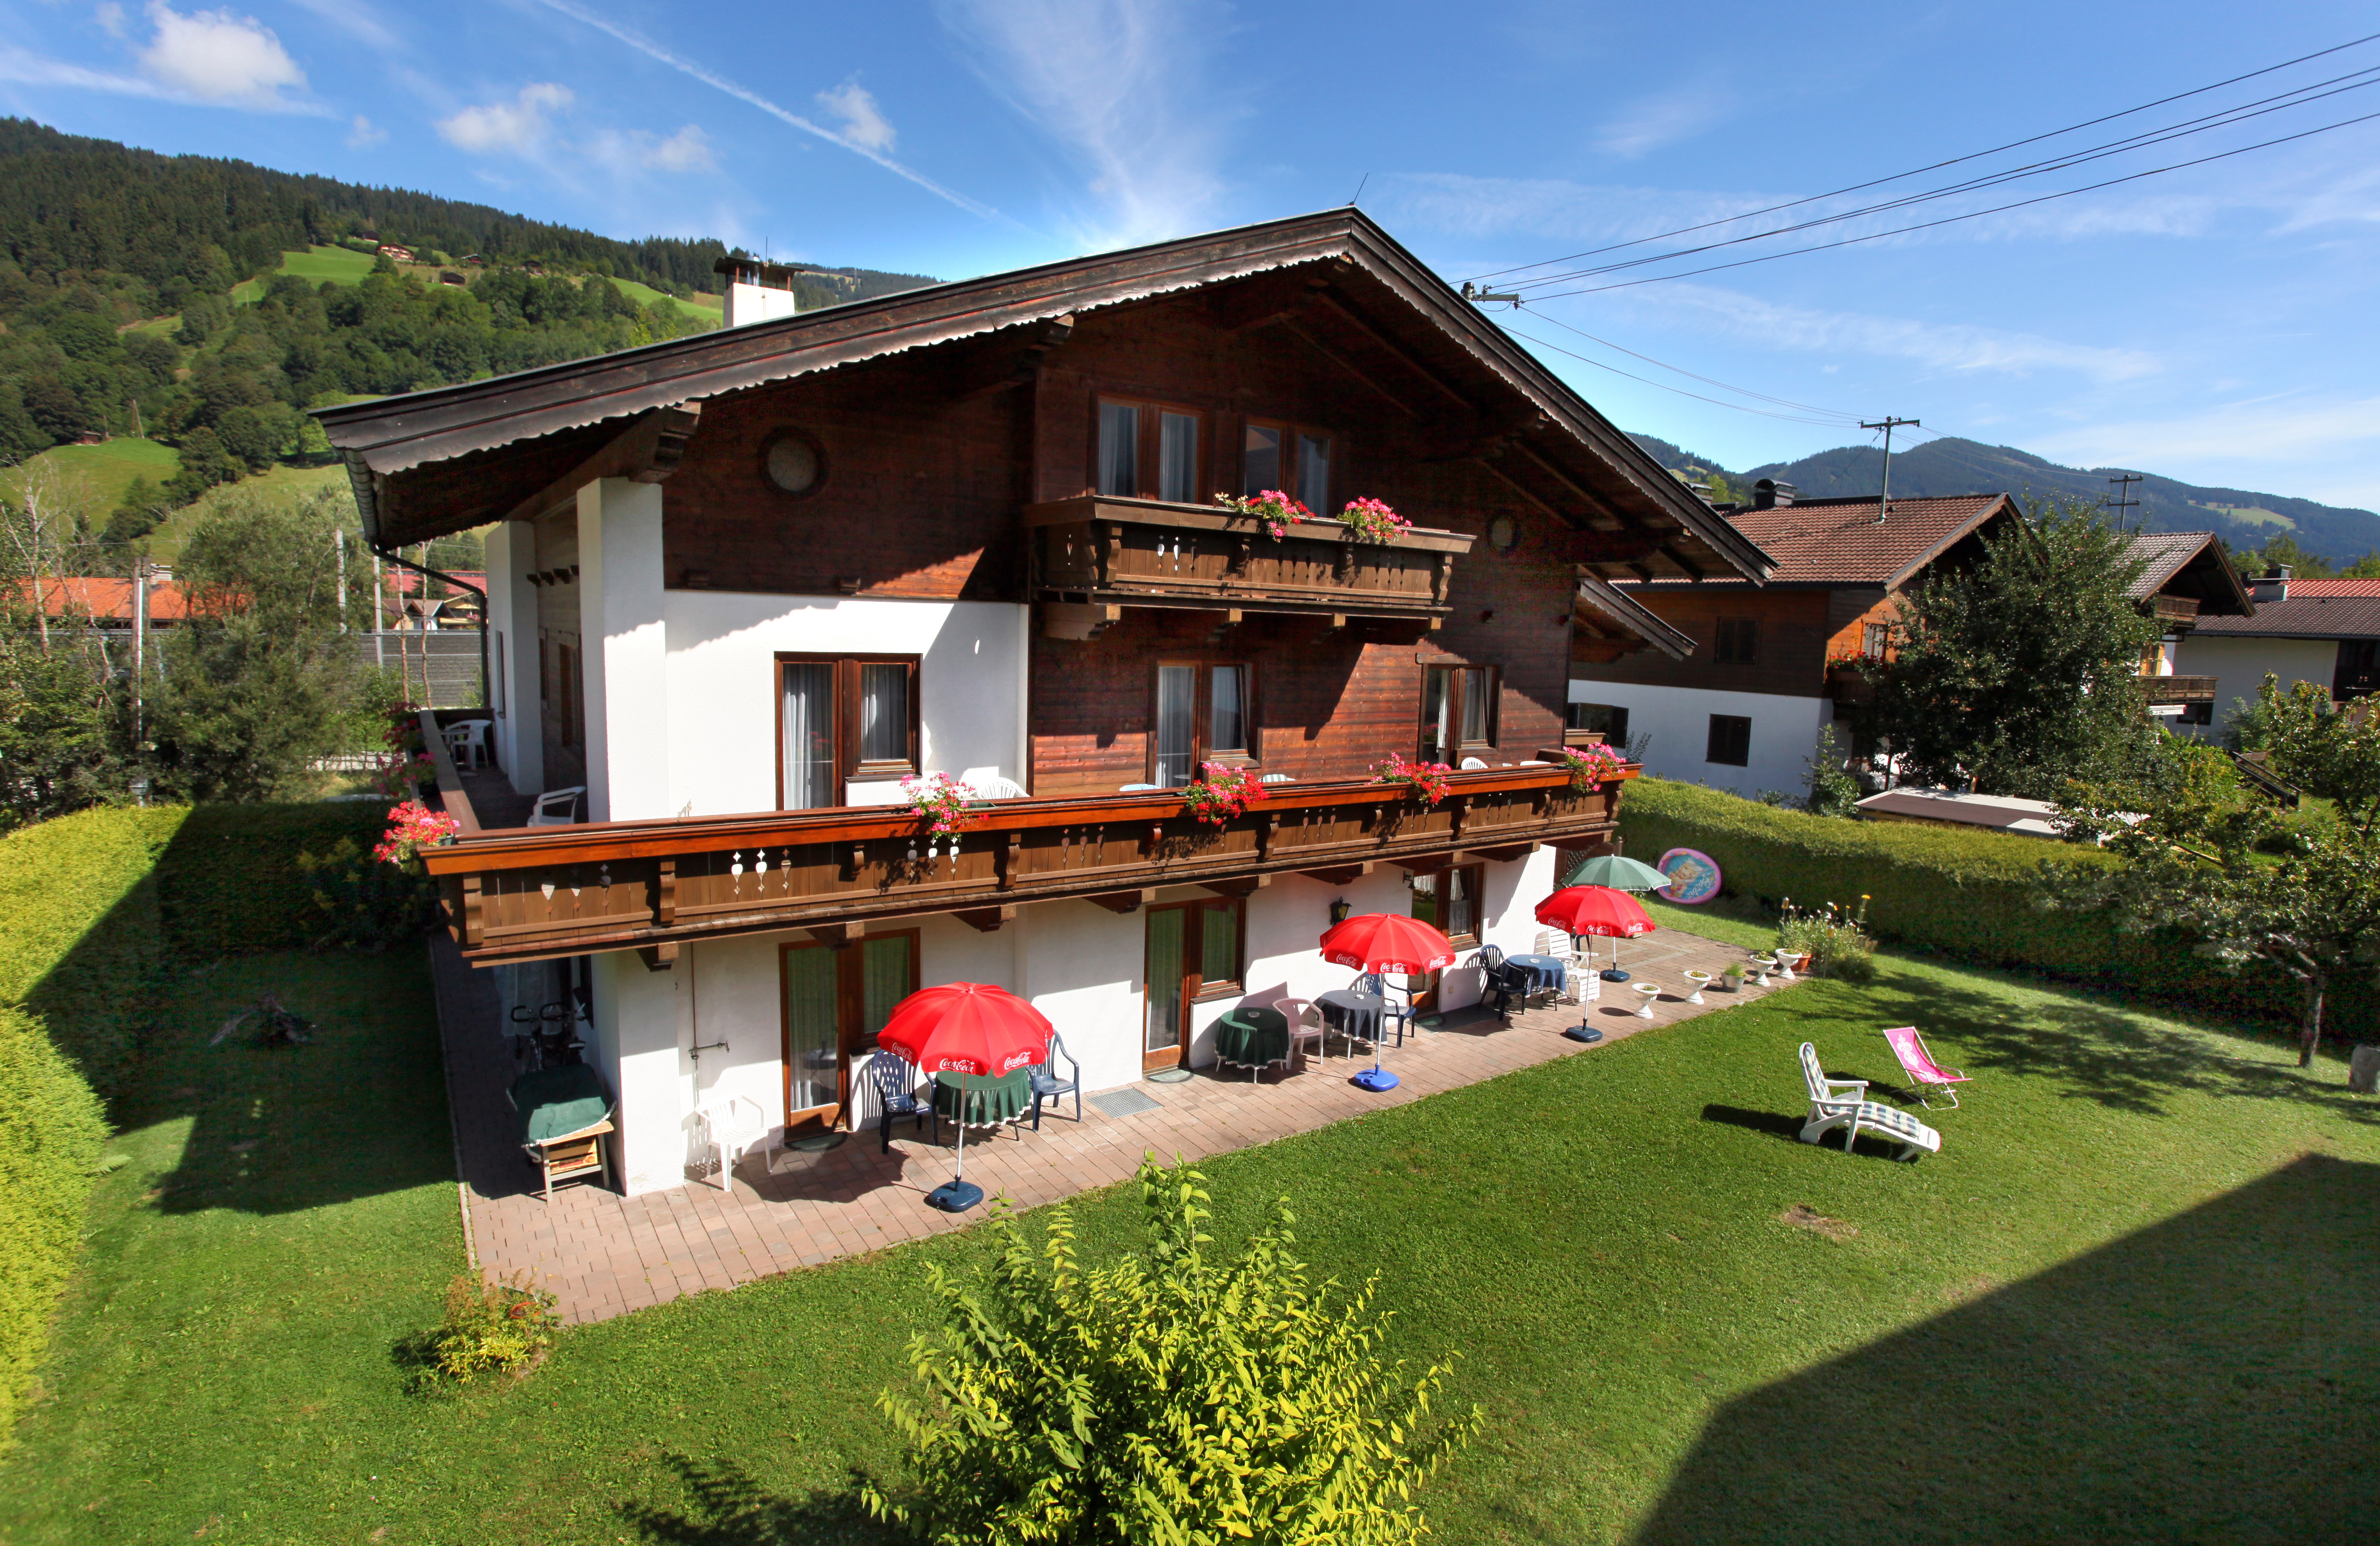 Pension Brixana <br/>94.00 ew <br/> <a href='http://vakantieoplossing.nl/outpage/?id=7ac4489c68a4b0922c41d1e08c5c1403' target='_blank'>View Details</a>